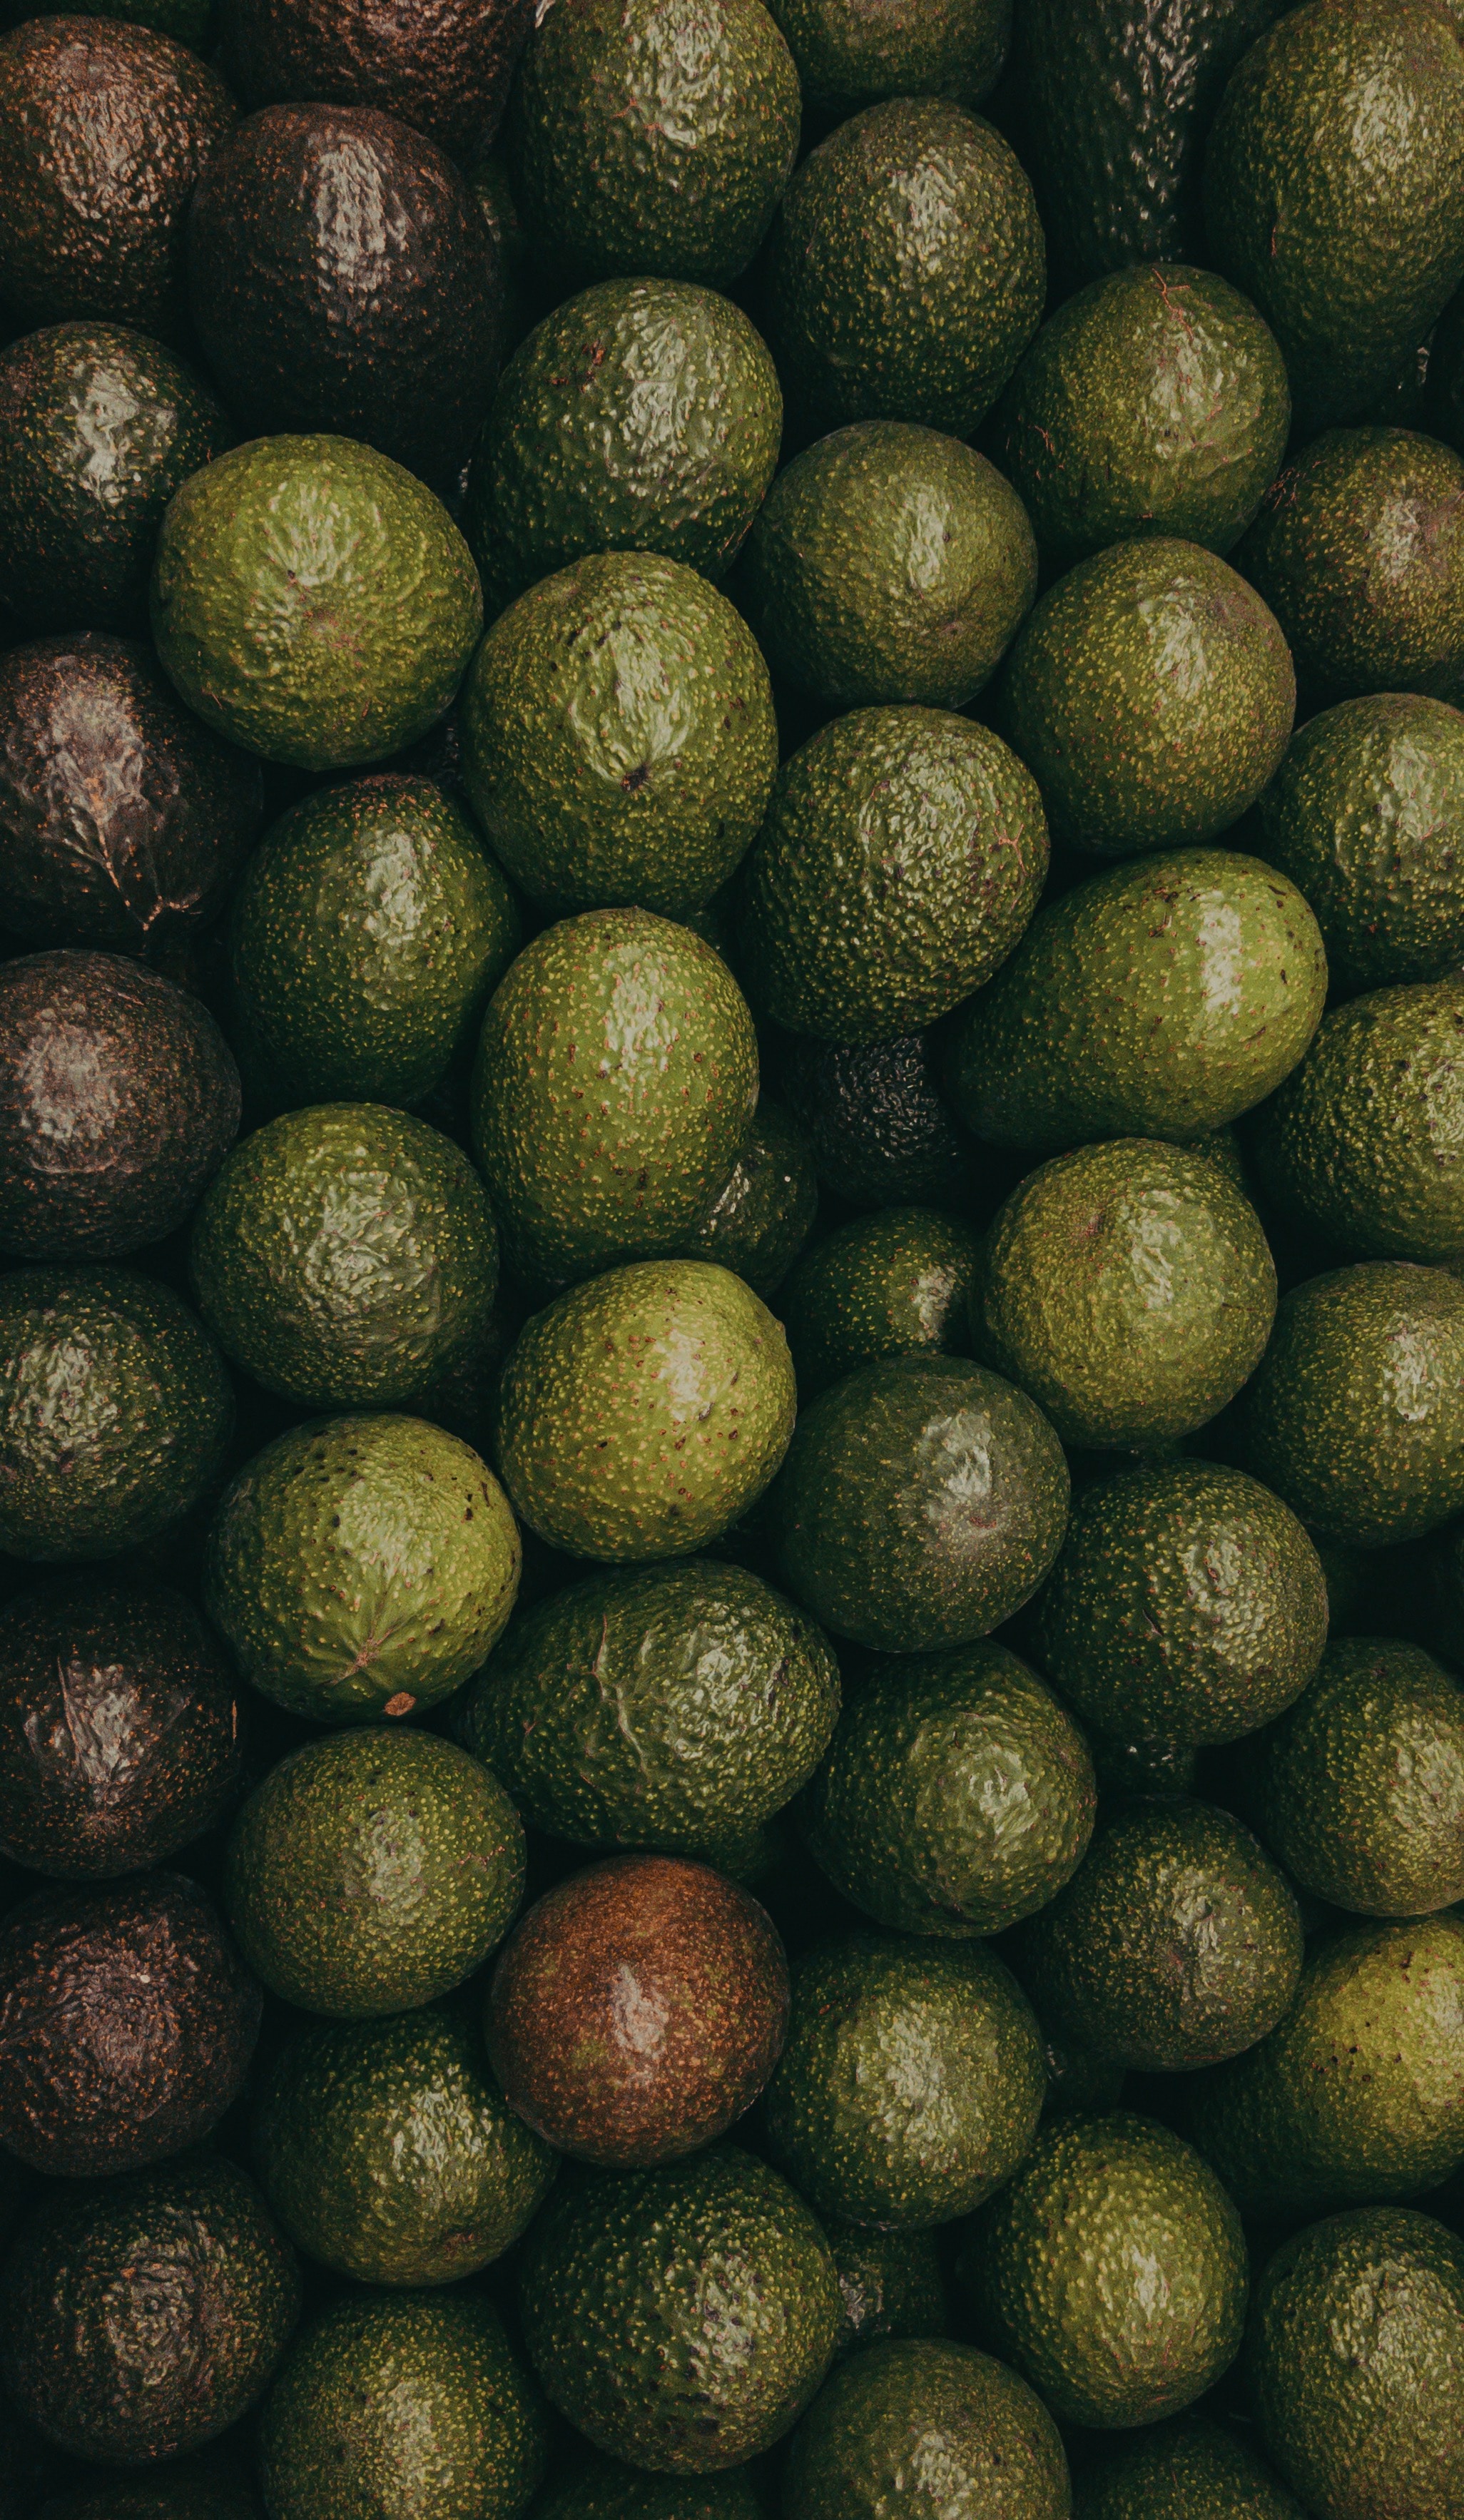 72477 download wallpaper fruits, green, texture, textures, avocado screensavers and pictures for free